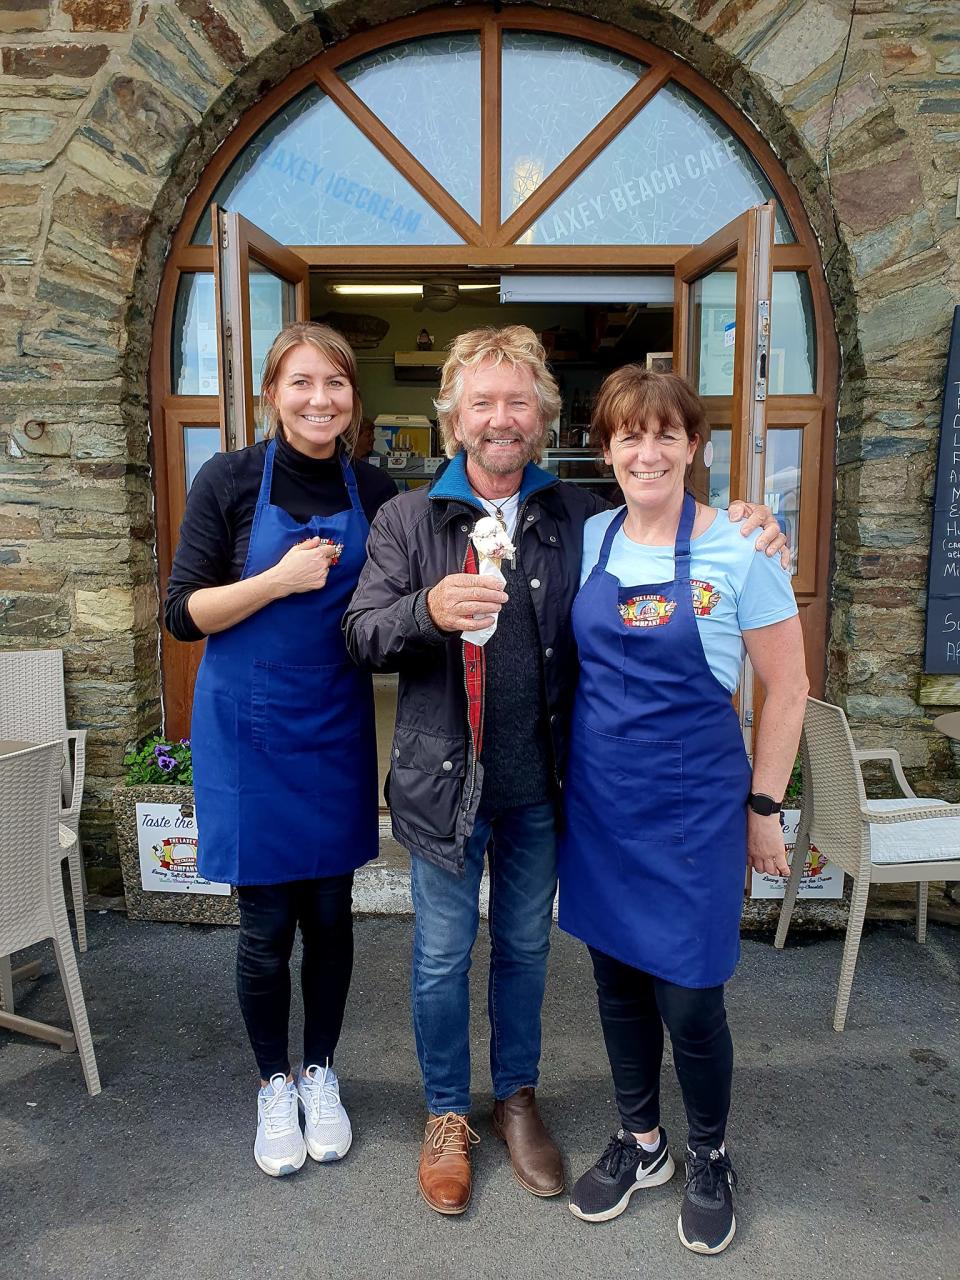 Noel Edmonds posed with staff at the Laxey Beach Stop Cafe on the Isle of Man. (SWNS)

